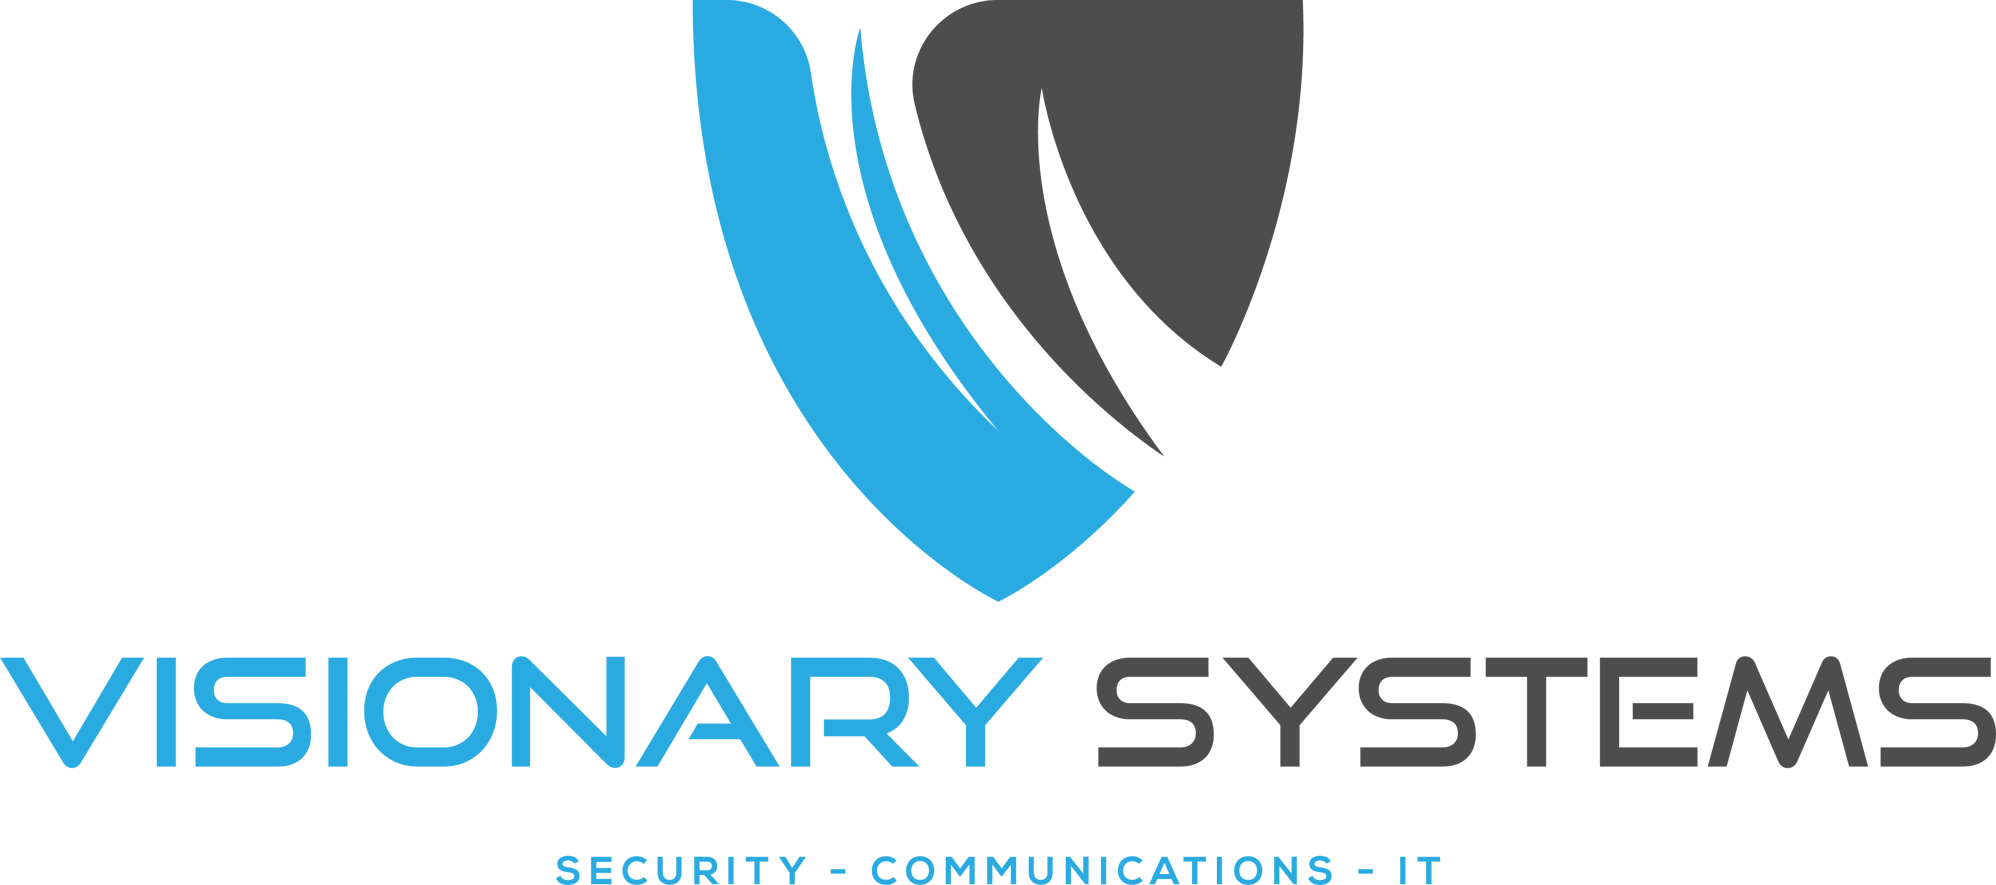 Visionary Systems - Full Color No Background - PNG Version